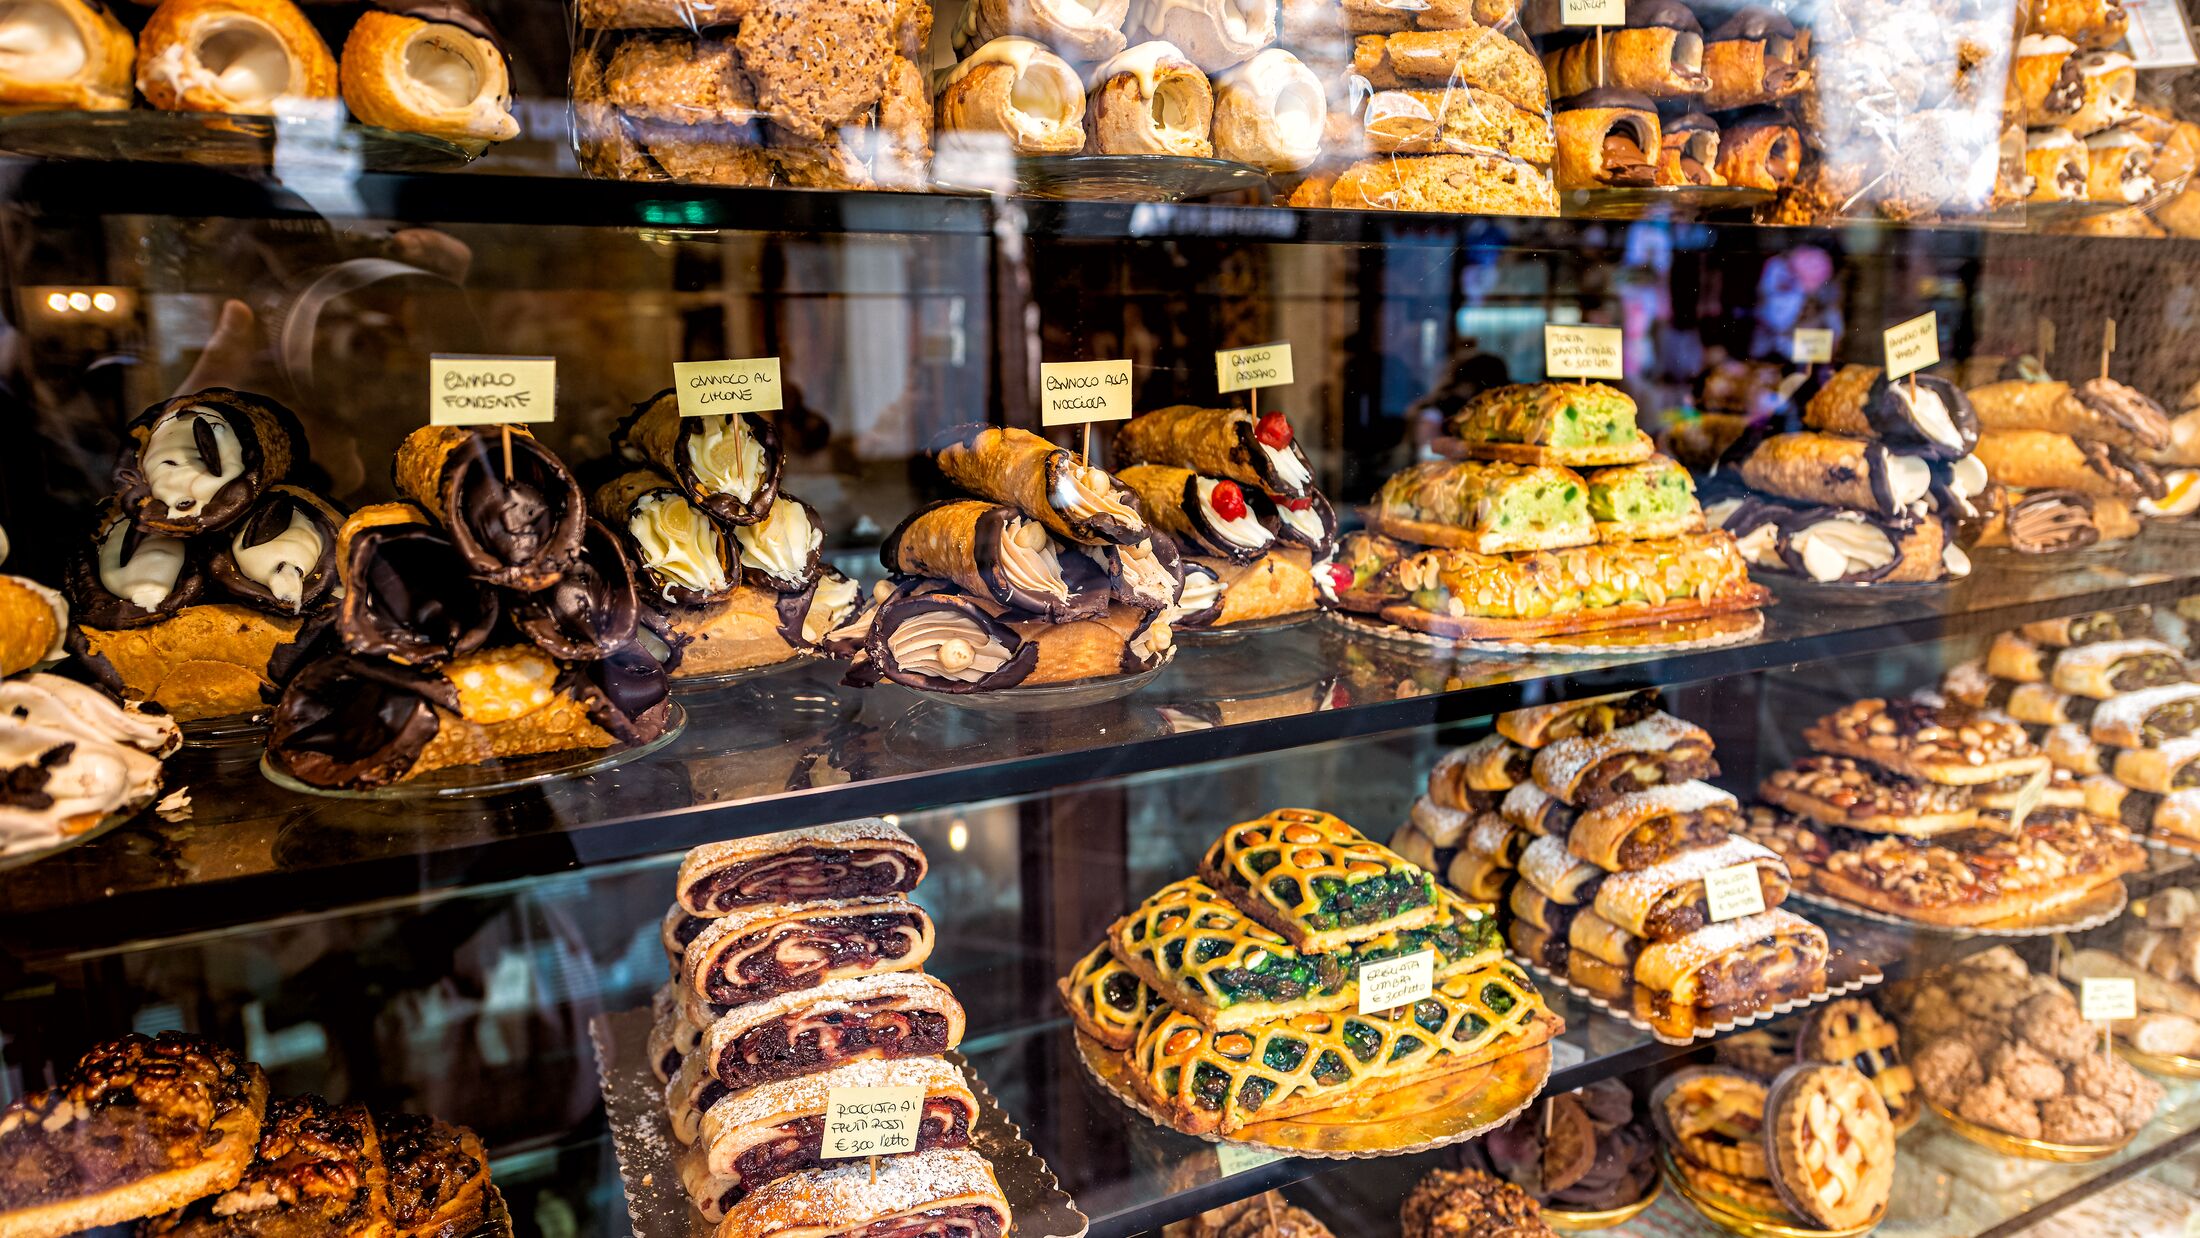 Pastry bakery store shop in Assisi, Umbria Italy selling dessert chocolate cannoli, rocciata cakes and pies with price tags through retail display glass window